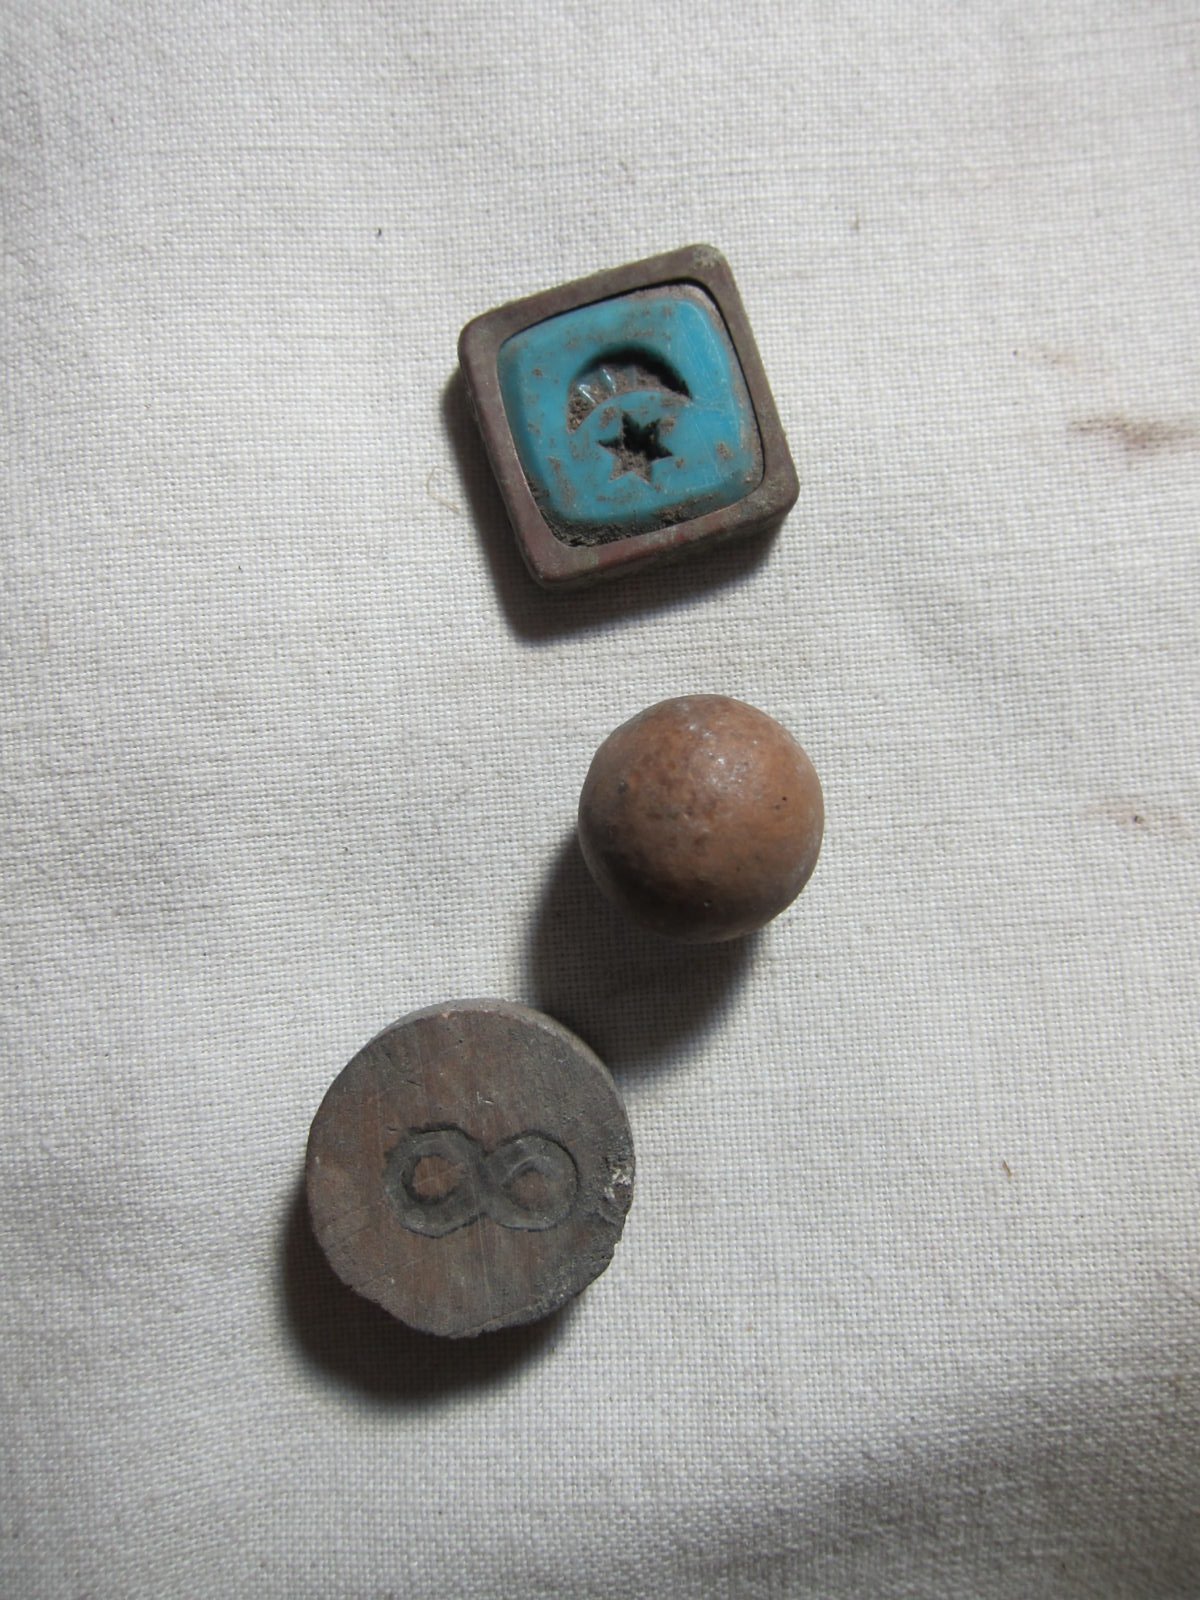 Artifacts found at 97 Orchard Street